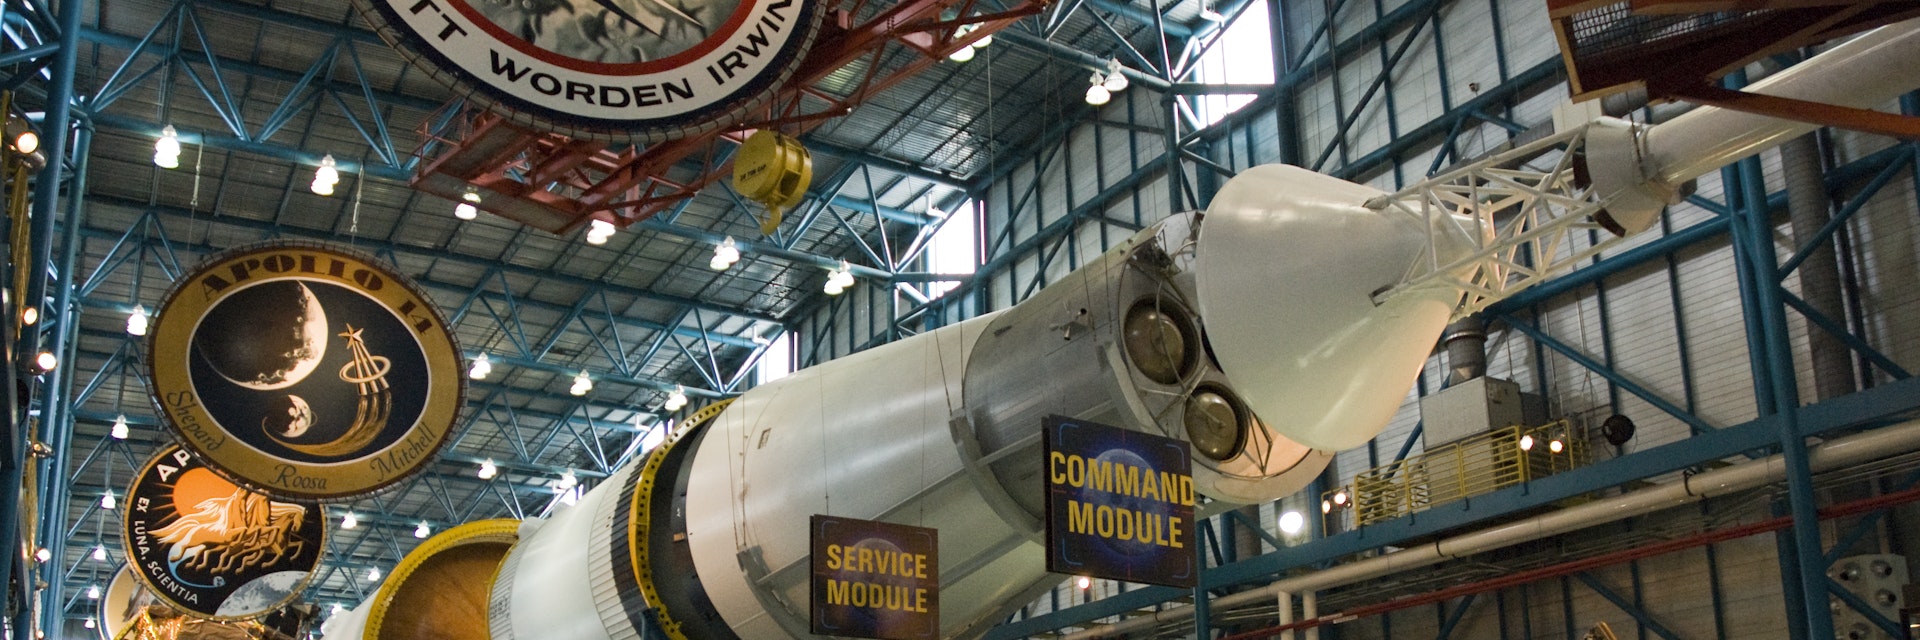 Saturn V rocket displayed above Apollo command and service modules at the Apollo/Saturn V Center at the Kennedy Space Center.